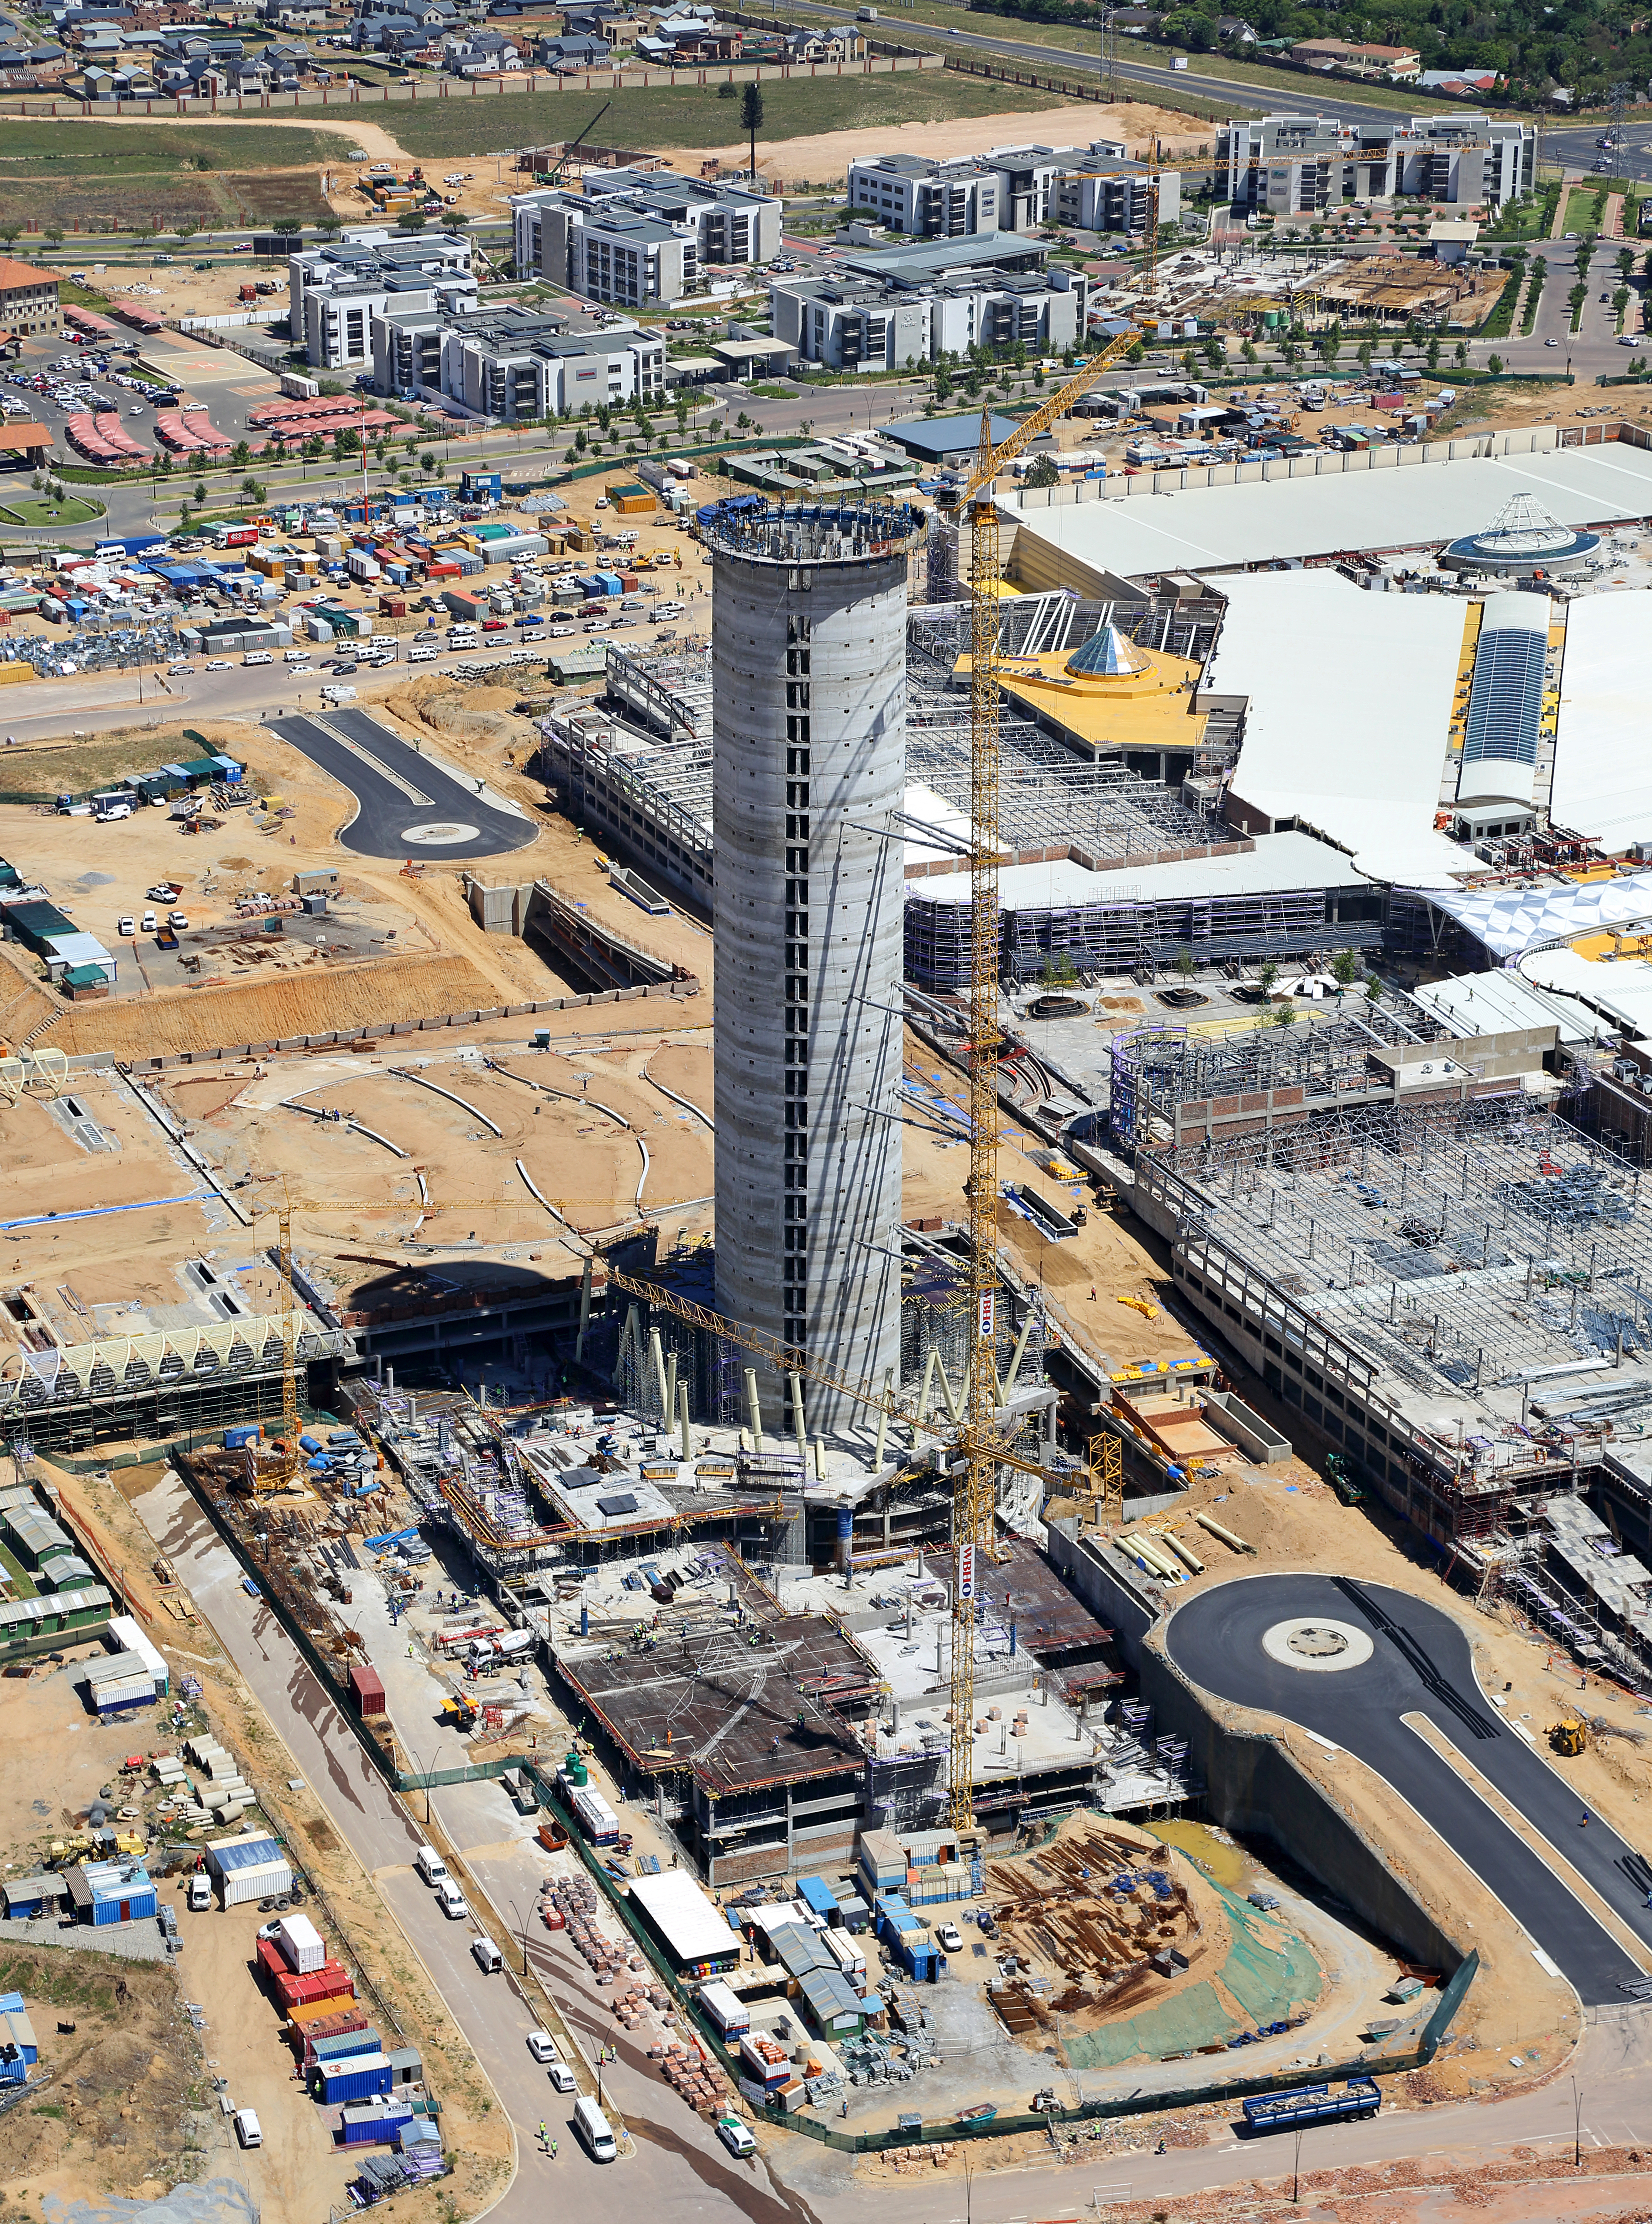 PwC Tower under construction on the same site as the Mall of Africa (Grant Duncan Smith | Dreamstime)